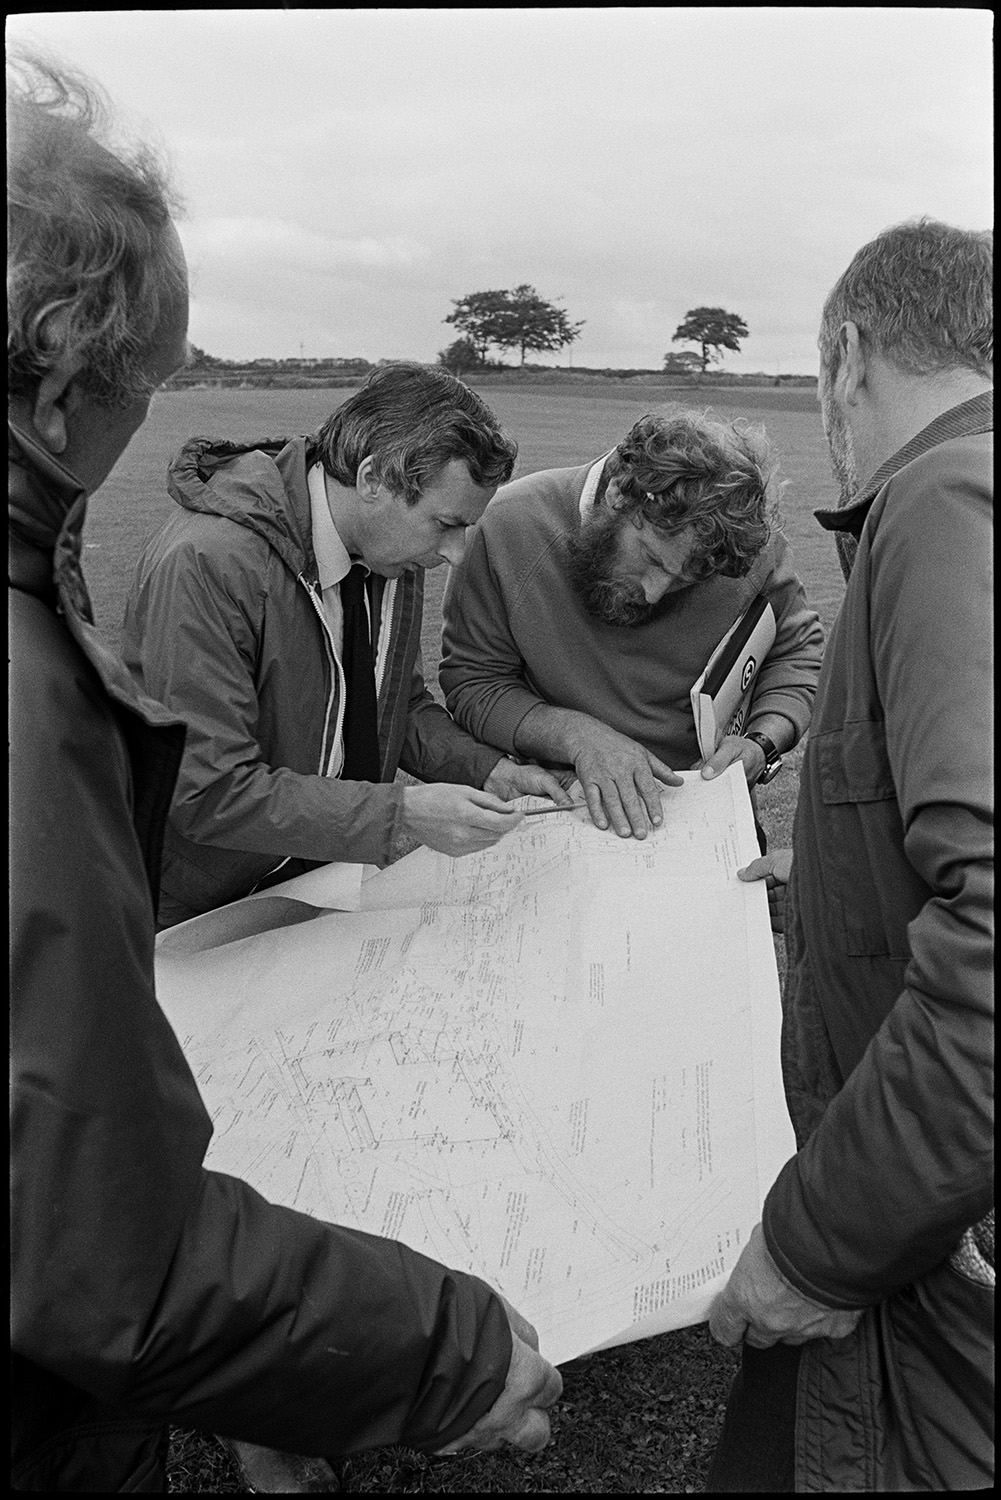 Planners, architects, teacher meet on site to discuss plans for new school.
[Planners, architects and teachers meeting in a field in Chulmleigh to discuss the site of the new school. They are looking at a large map or plan.]